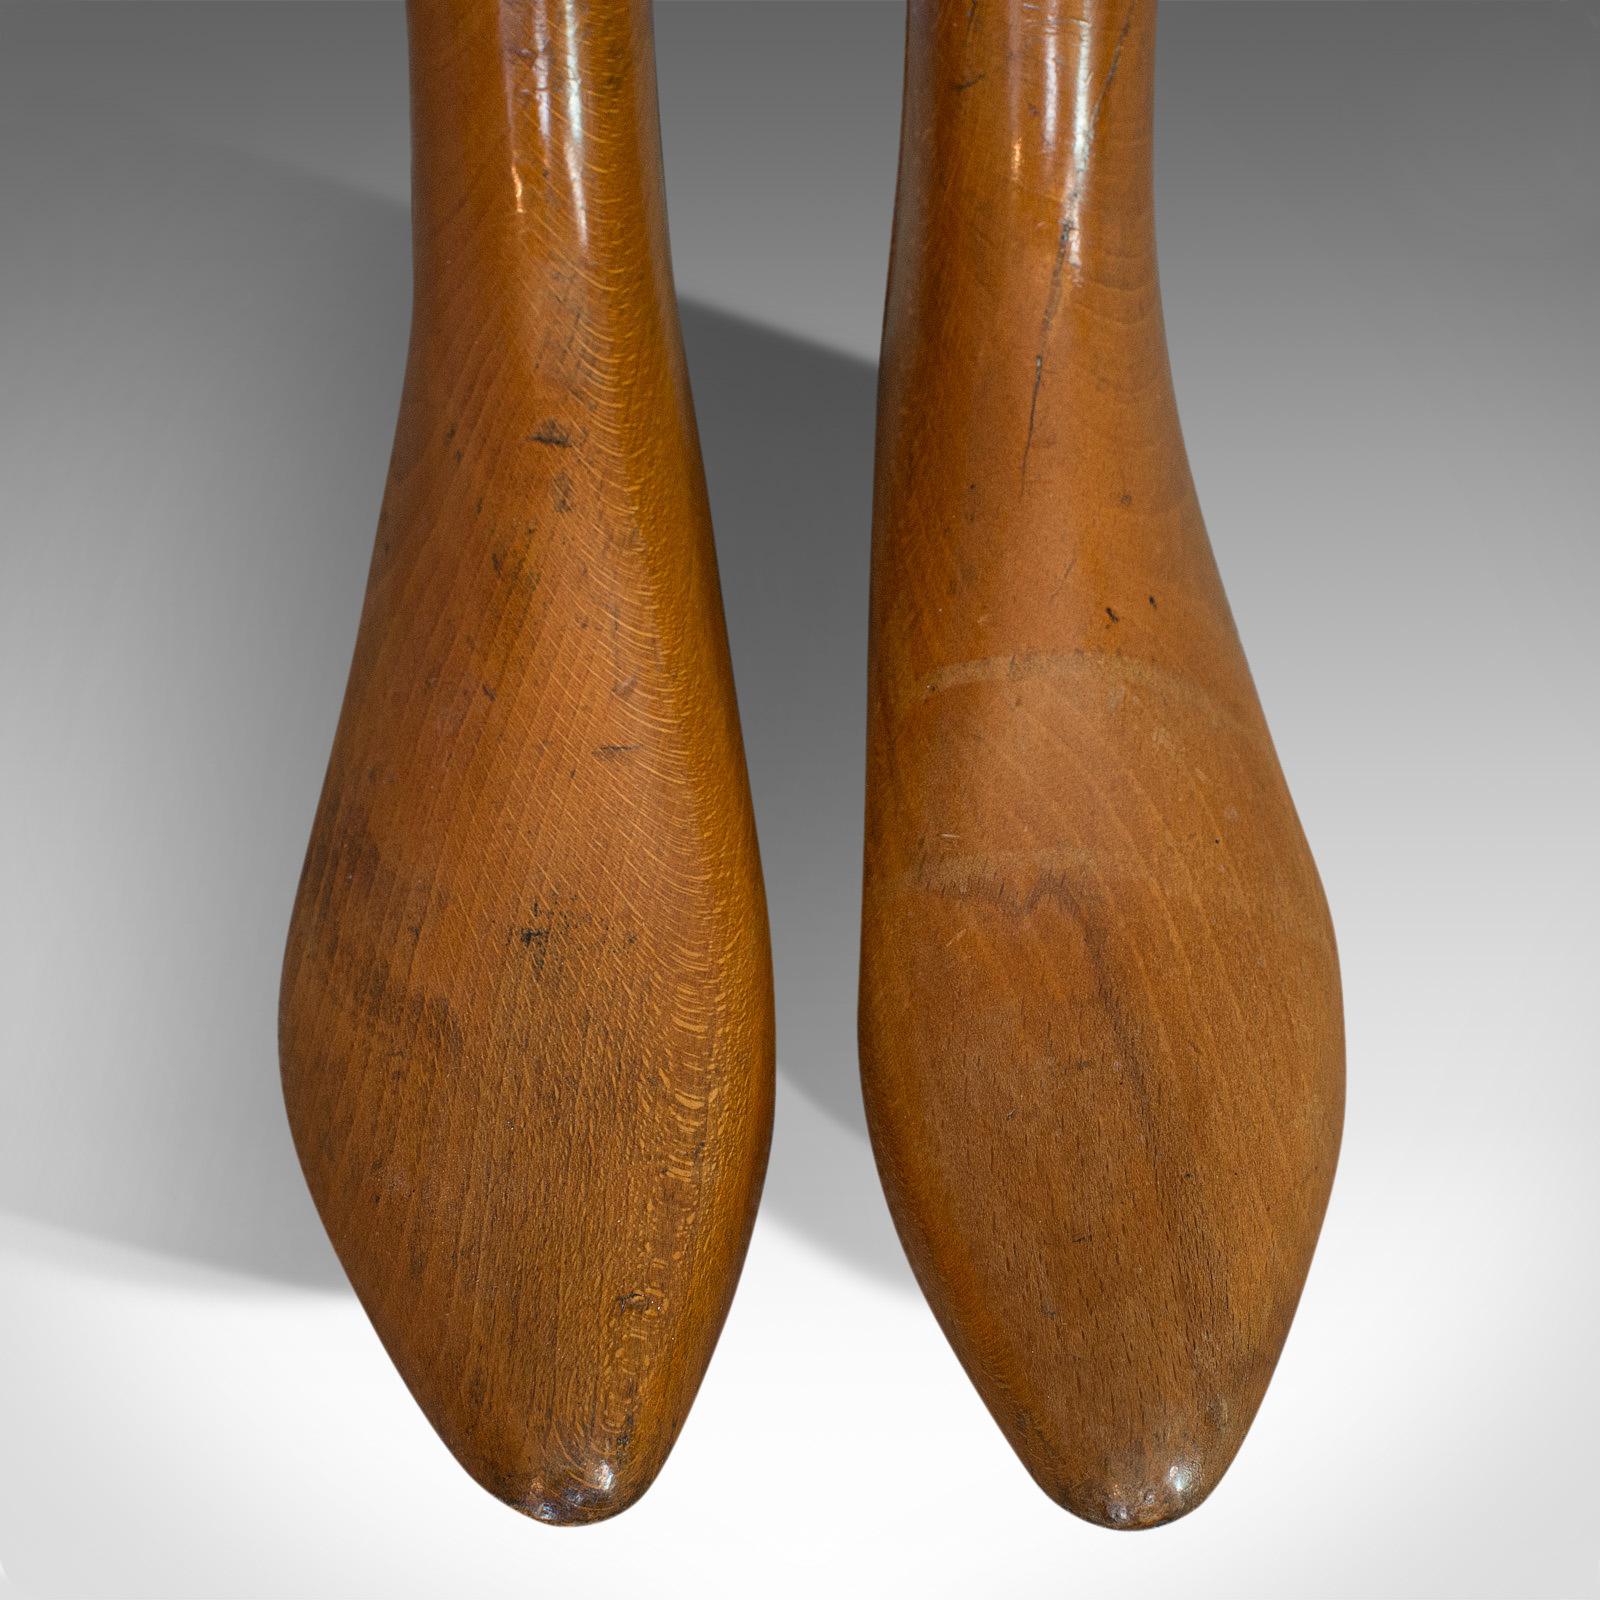 20th Century Pair of Antique Shoe Lasts, English, Beech, Shoemaker's Last, Edwardian, 1910 For Sale